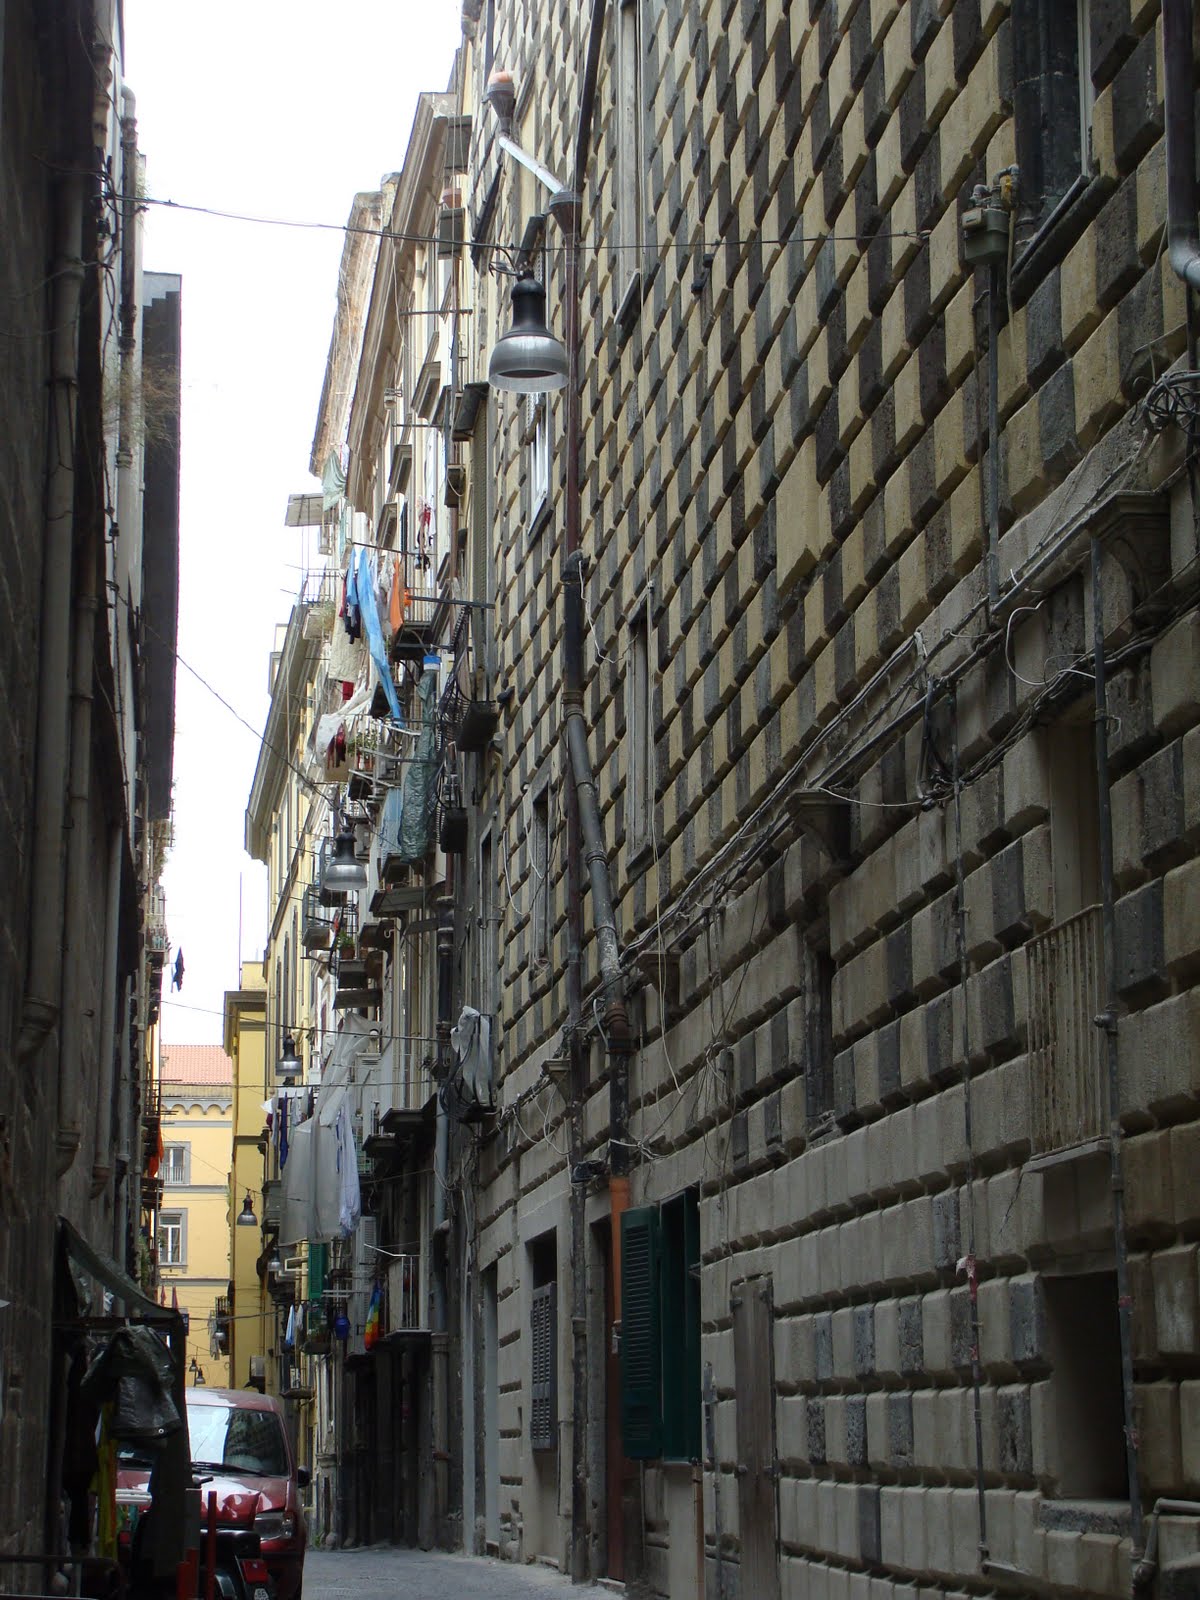 The Old City, Naples, Italy #2